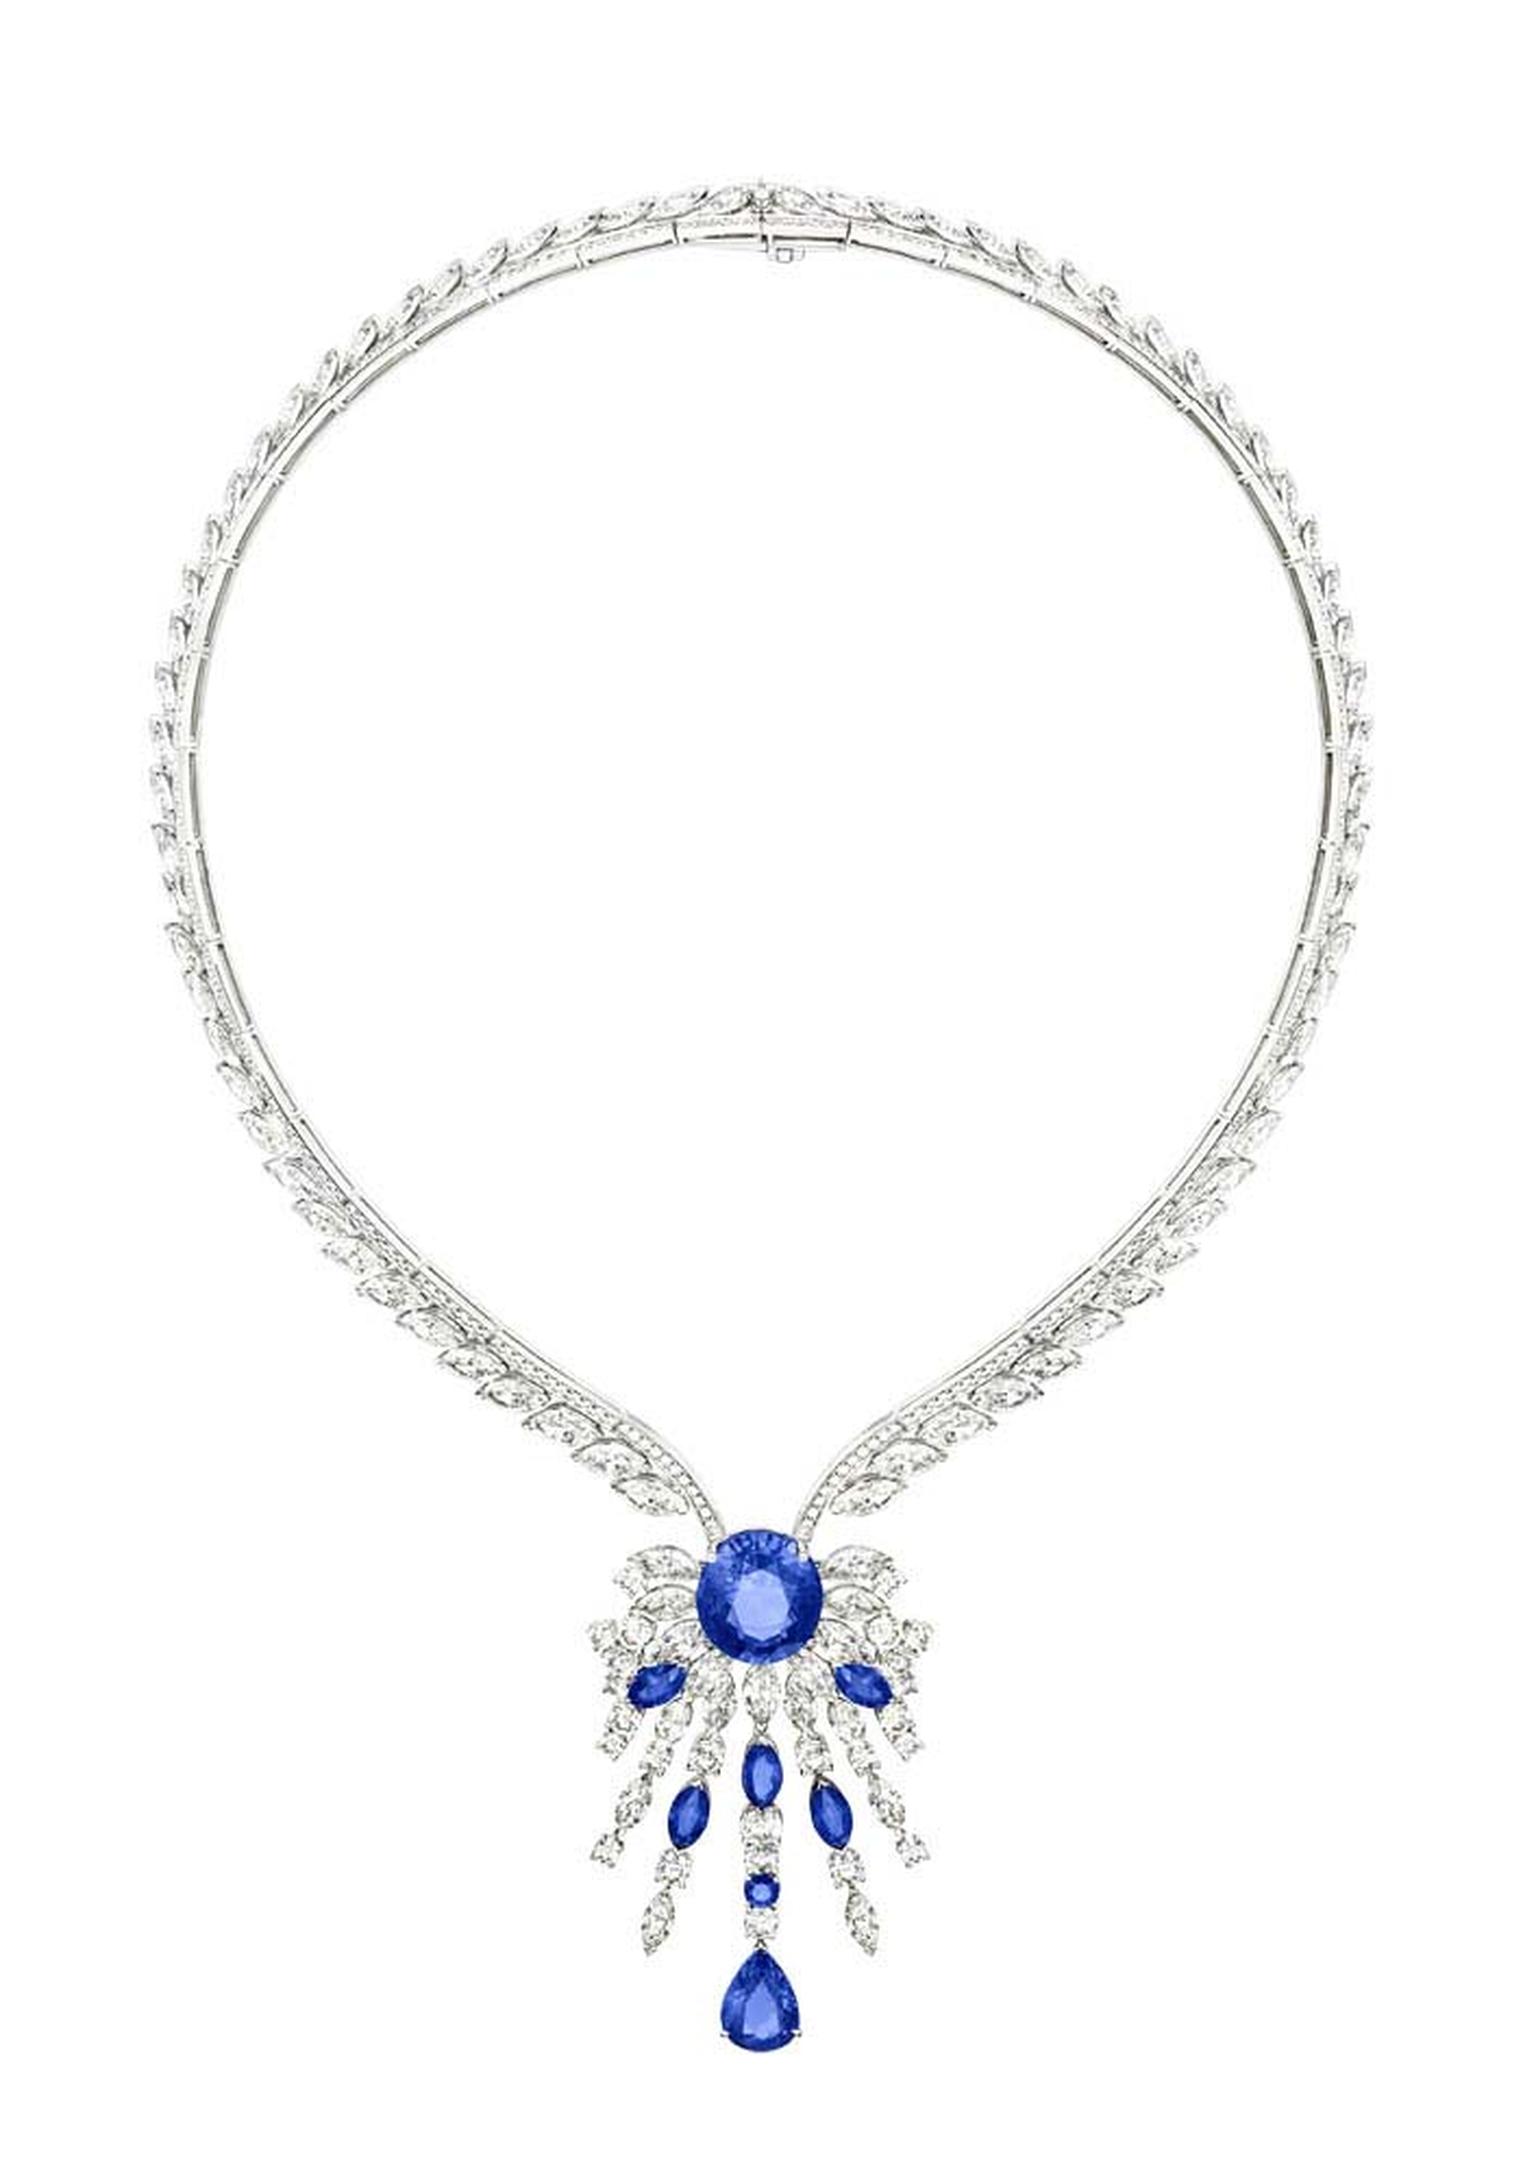 Extremely Piaget collection necklace in white gold set with 23.11ct marquise-cut diamonds, a 14.28ct oval-cut blue sapphire, brilliant-cut diamonds, marquise-cut blue sapphires, a pear-shaped blue sapphire and a brilliant-cut blue sapphire.